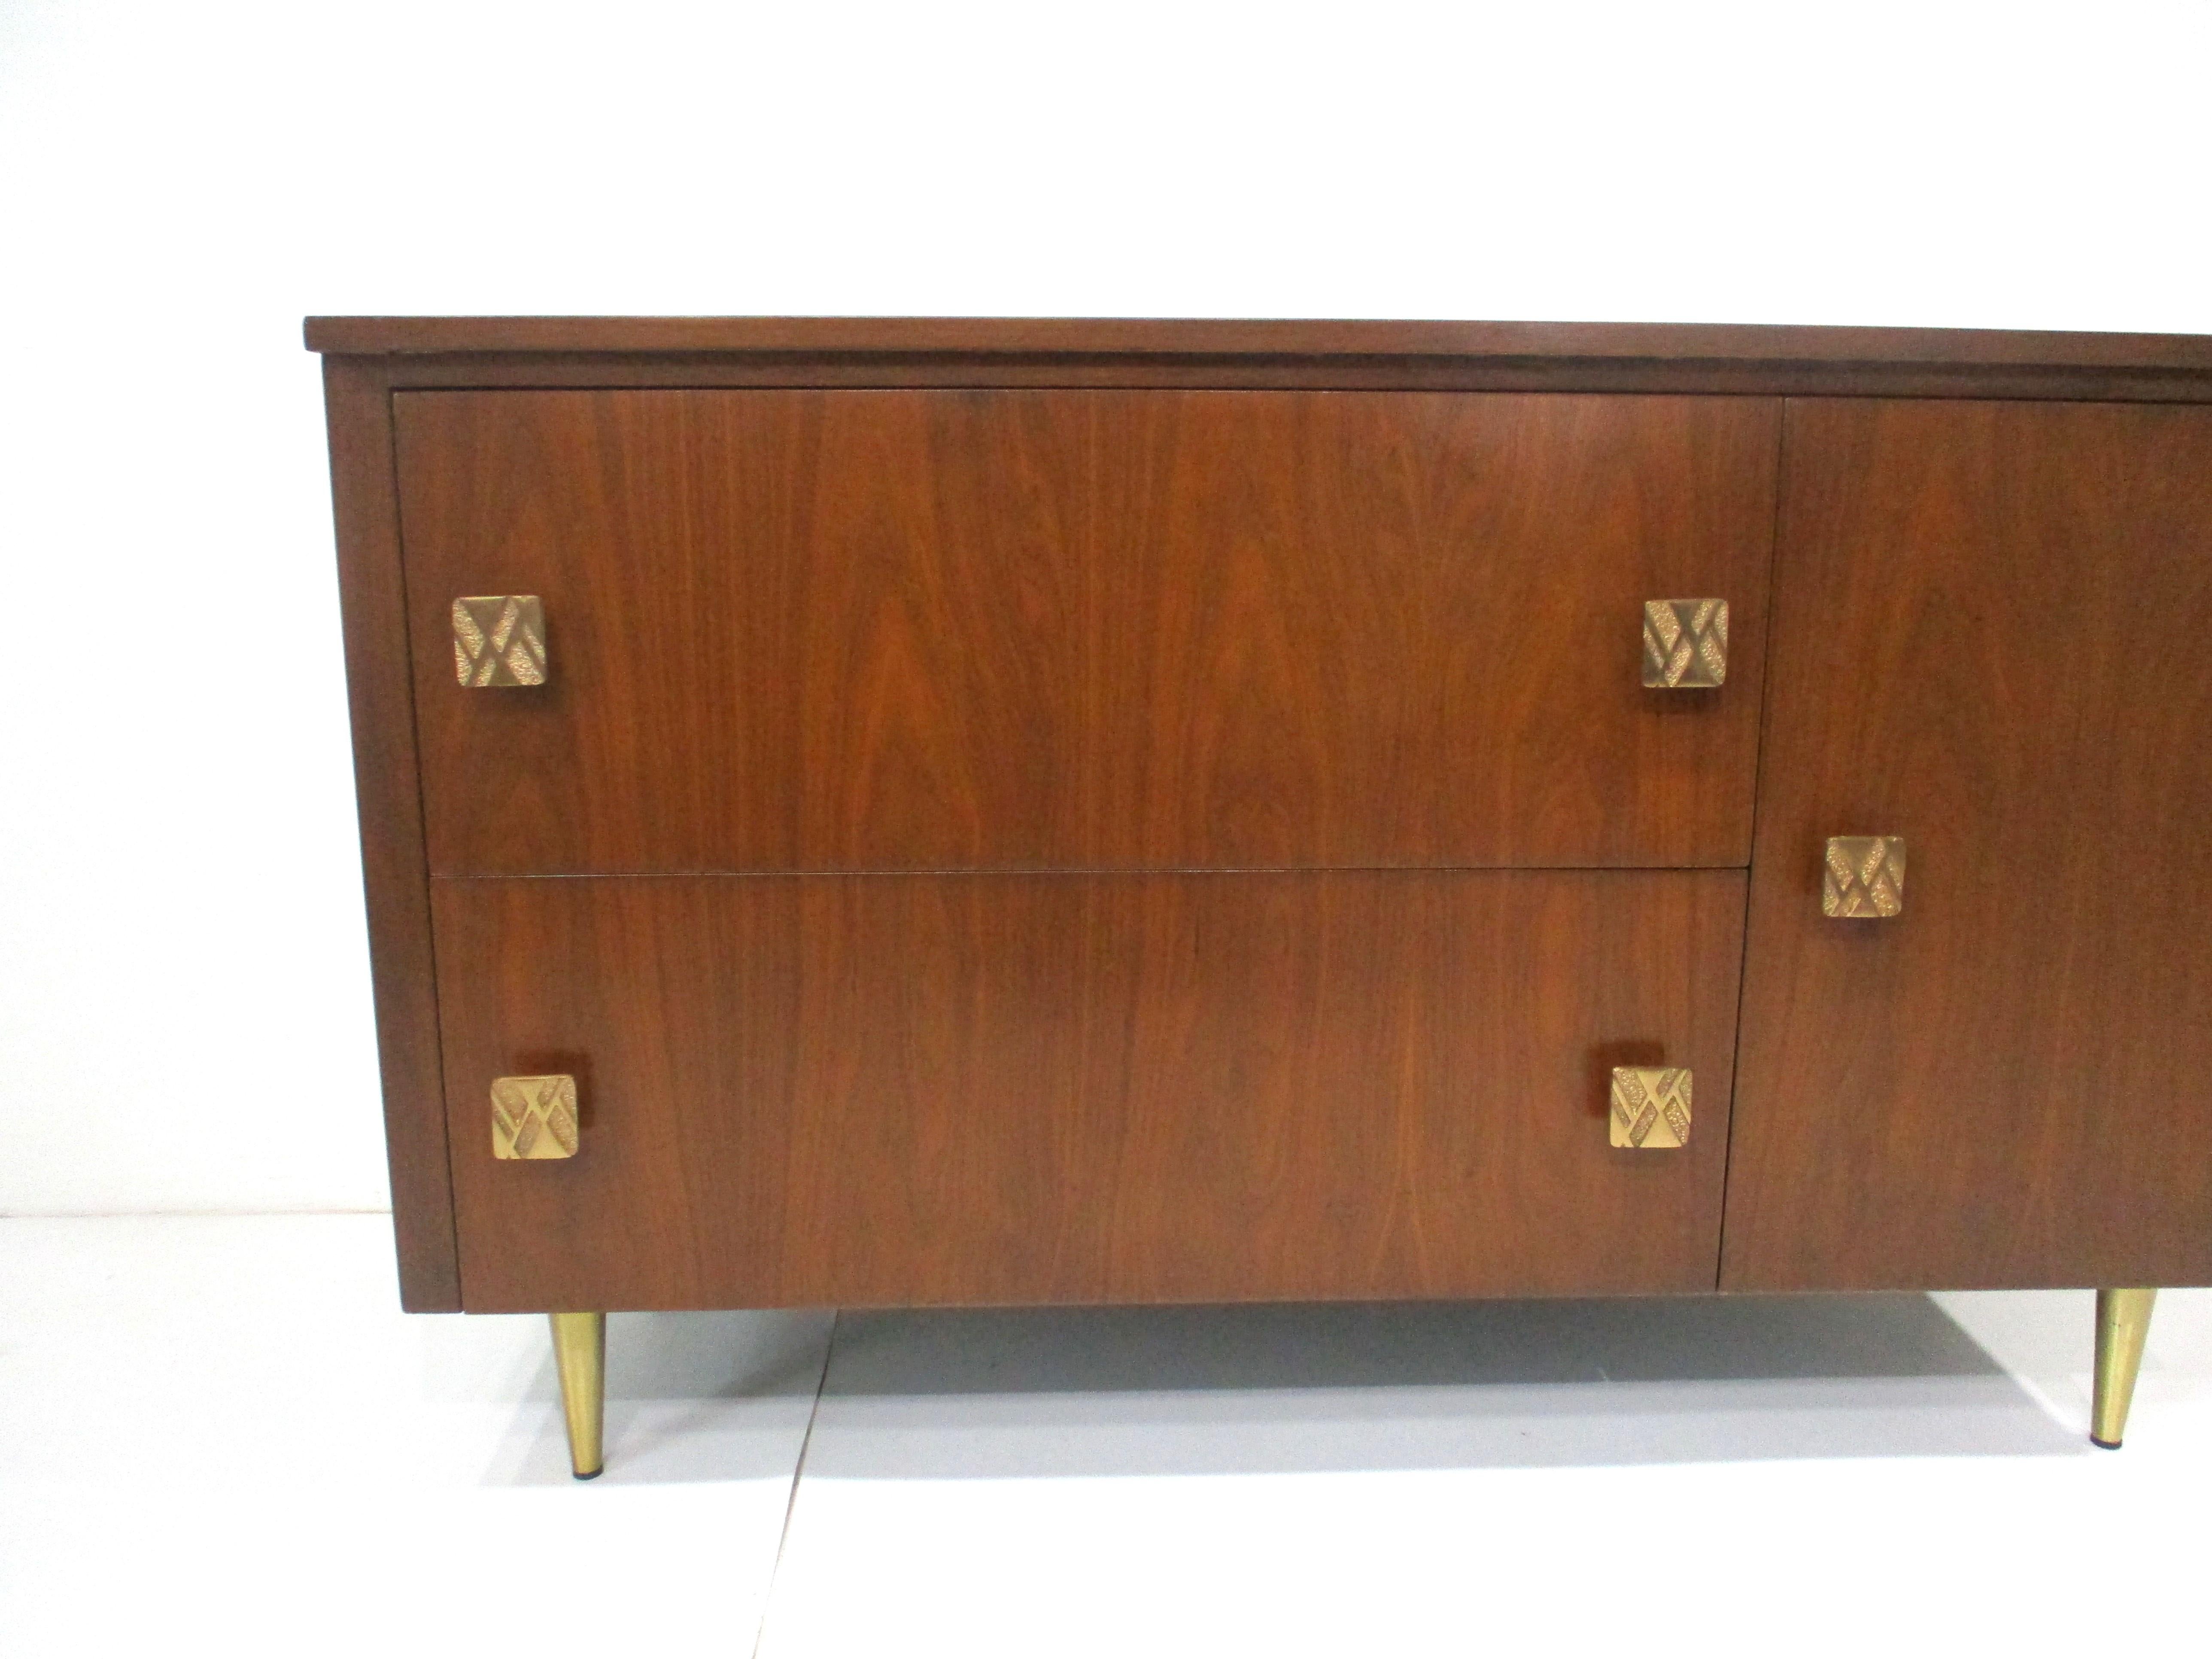 A medium dark walnut cabinet with wonderful graining , cast brass pulls and tapered brass legs . With two large deep drawers and a door with a non adjustable small half shelve the sculptural pulls having angular designs give the piece fine detail